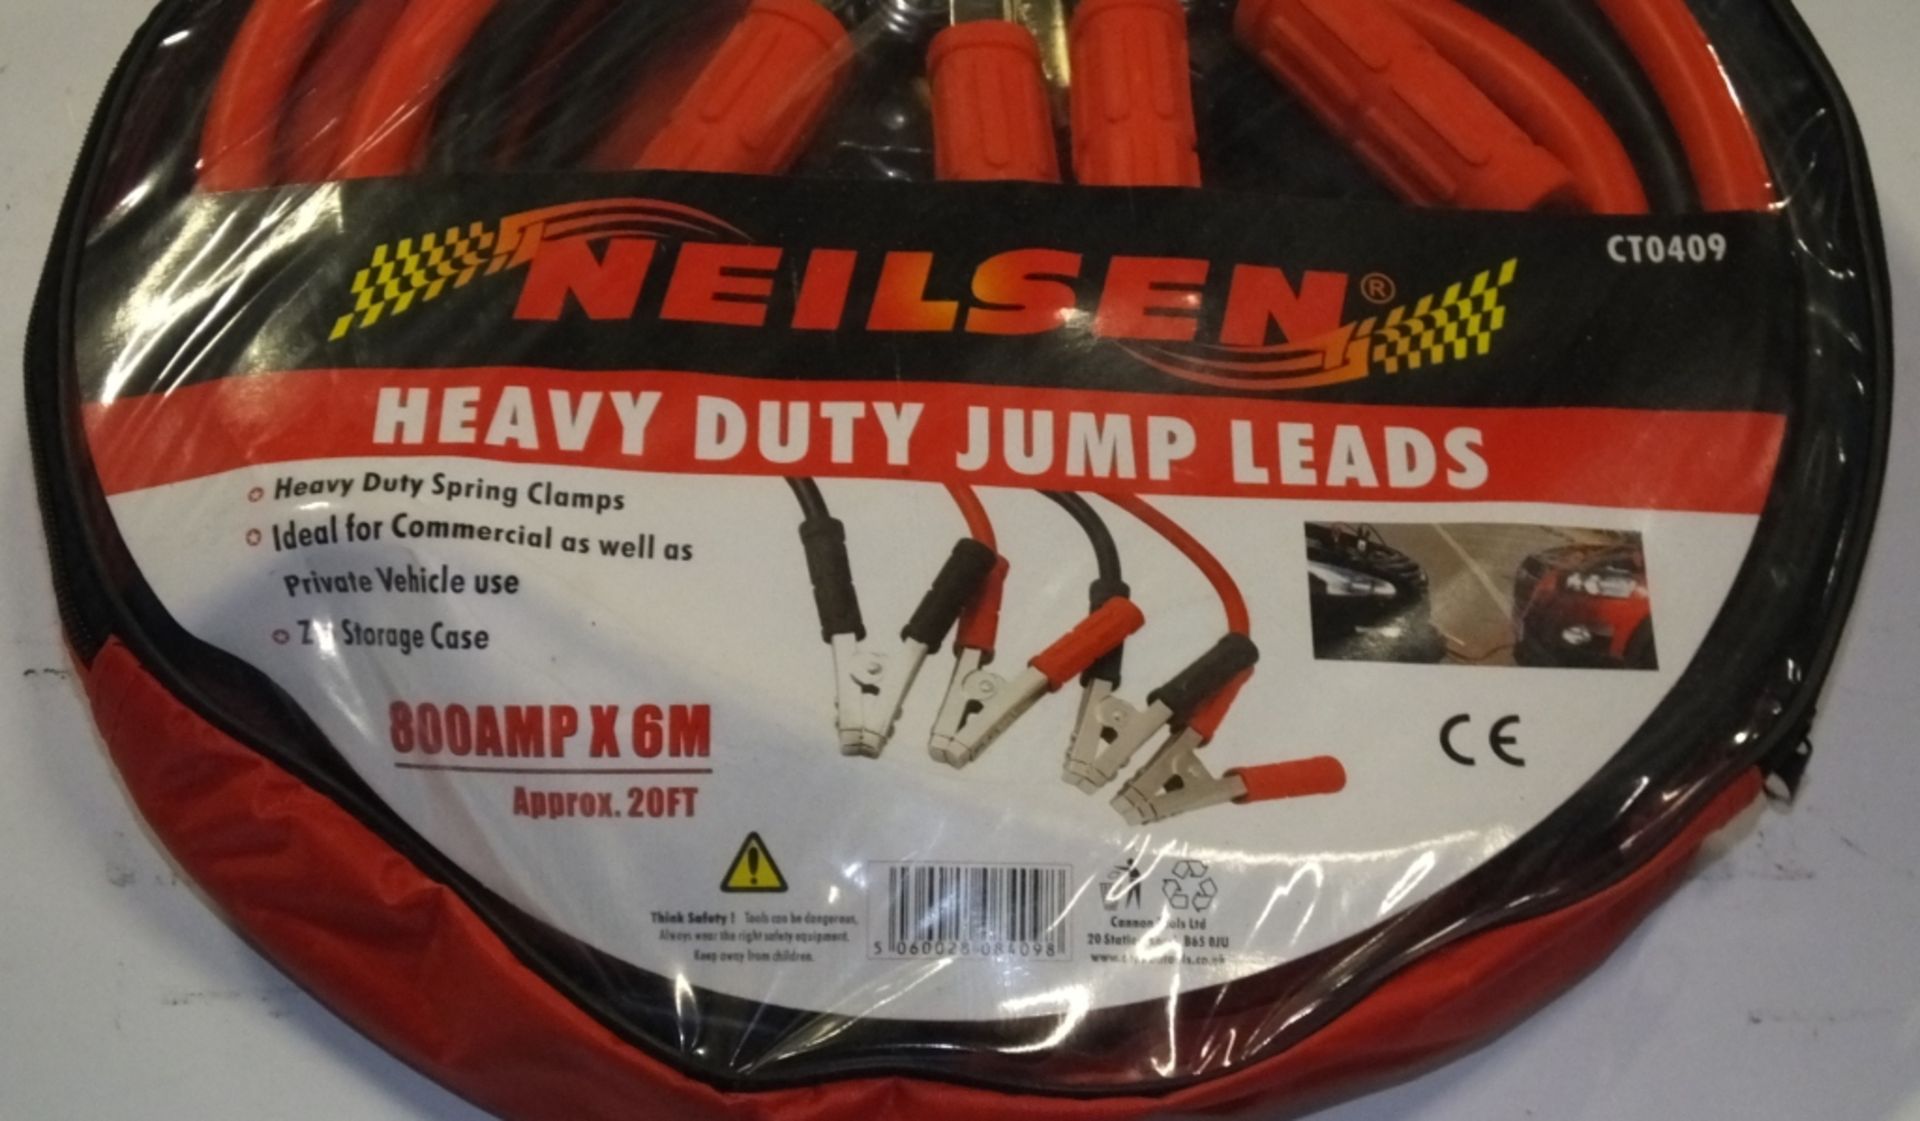 Neilsen CT0409 Heavy duty jump leads - 800amp x 6M - Image 3 of 3